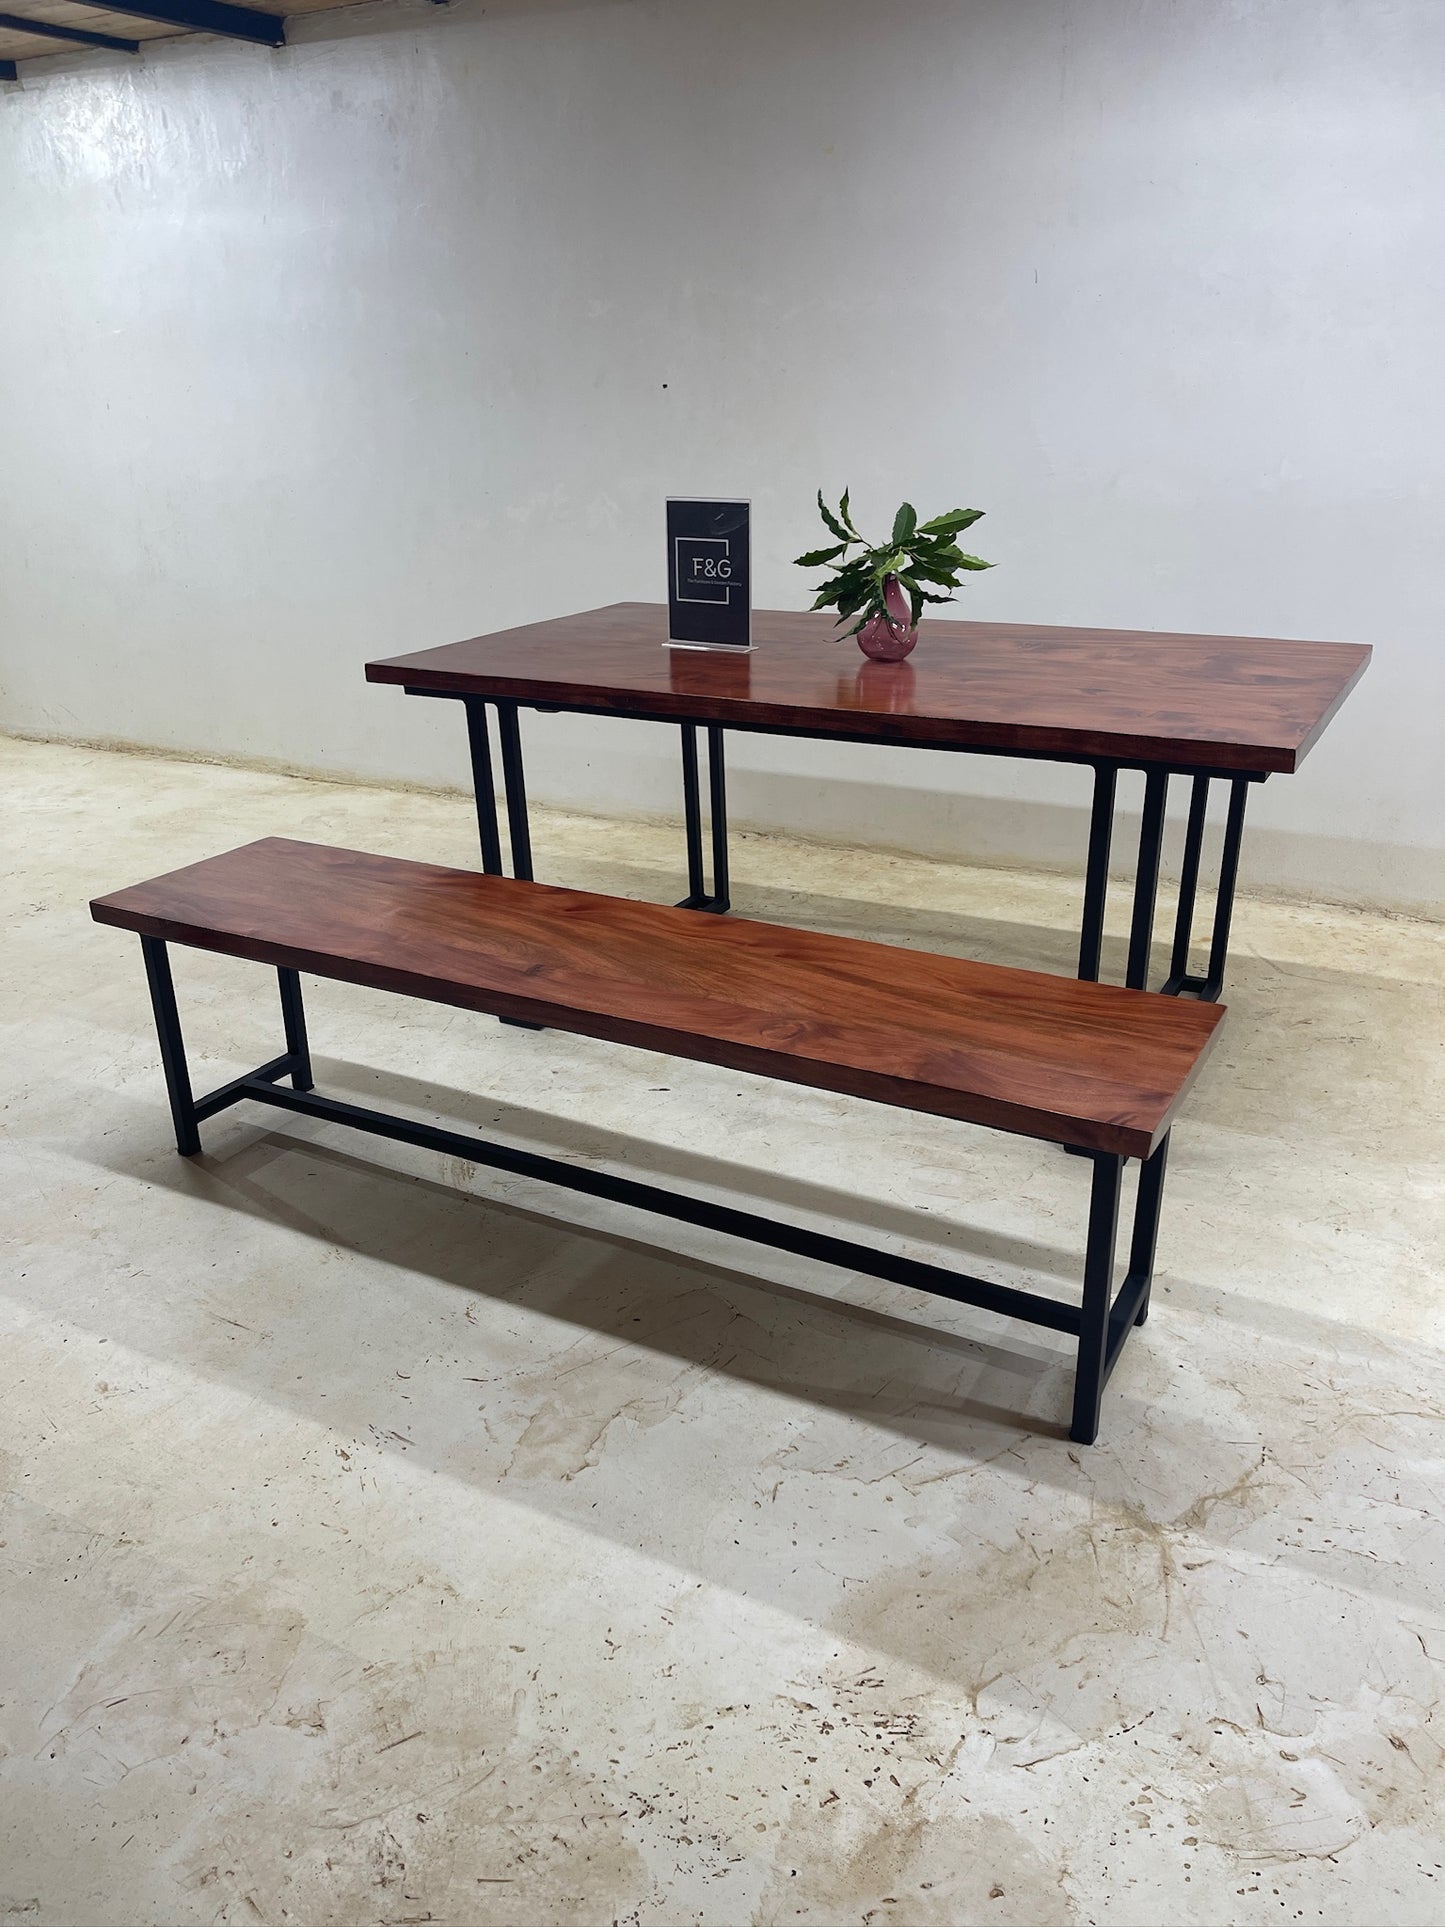 The Elba Dining Table